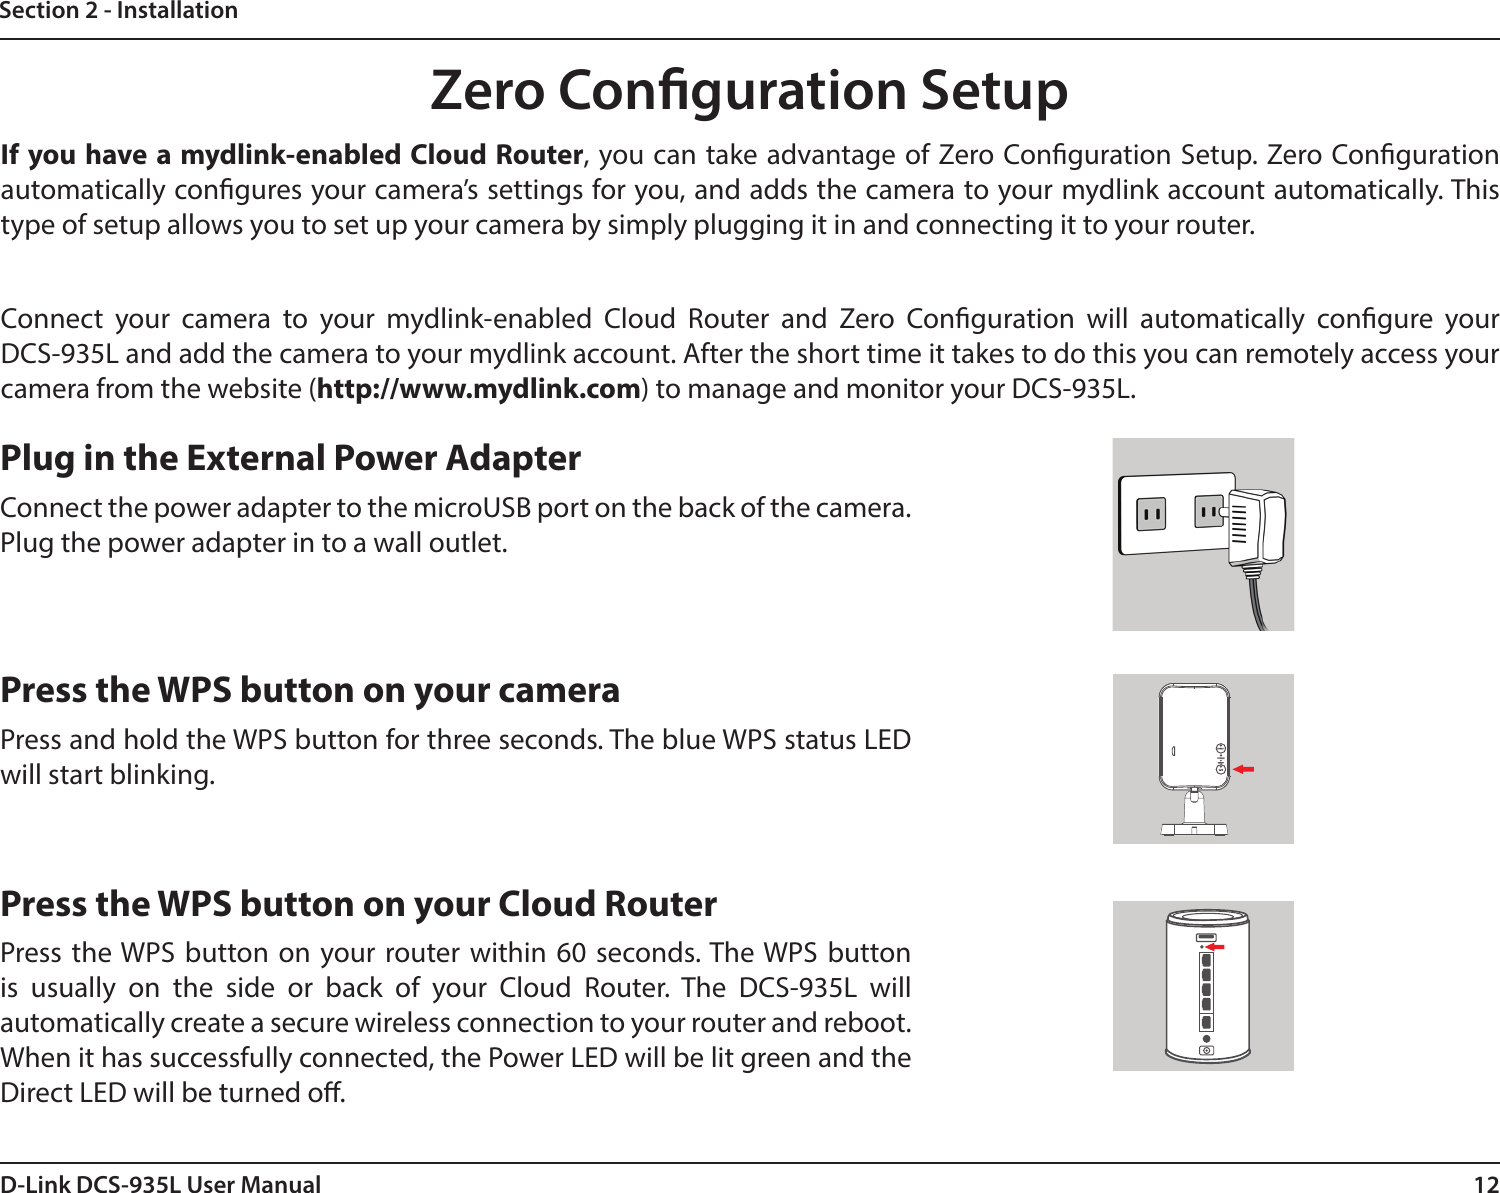 12D-Link DCS-935L User ManualSection 2 - InstallationZero Conguration SetupIf you have a mydlink-enabled Cloud Router, you can take advantage of Zero Conguration Setup. Zero Conguration automatically congures your camera’s settings for you, and adds the camera to your mydlink account automatically. This type of setup allows you to set up your camera by simply plugging it in and connecting it to your router.Connect your camera to your mydlink-enabled Cloud Router and Zero Conguration will automatically congure your DCS-935L and add the camera to your mydlink account. After the short time it takes to do this you can remotely access your camera from the website (http://www.mydlink.com) to manage and monitor your DCS-935L.Plug in the External Power AdapterConnect the power adapter to the microUSB port on the back of the camera. Plug the power adapter in to a wall outlet.Press the WPS button on your cameraPress and hold the WPS button for three seconds. The blue WPS status LED  will start blinking.Press the WPS button on your Cloud RouterPress the WPS button on your router within 60 seconds. The WPS button is usually on the side or back of your Cloud Router. The DCS-935L will automatically create a secure wireless connection to your router and reboot. When it has successfully connected, the Power LED will be lit green and the Direct LED will be turned o.